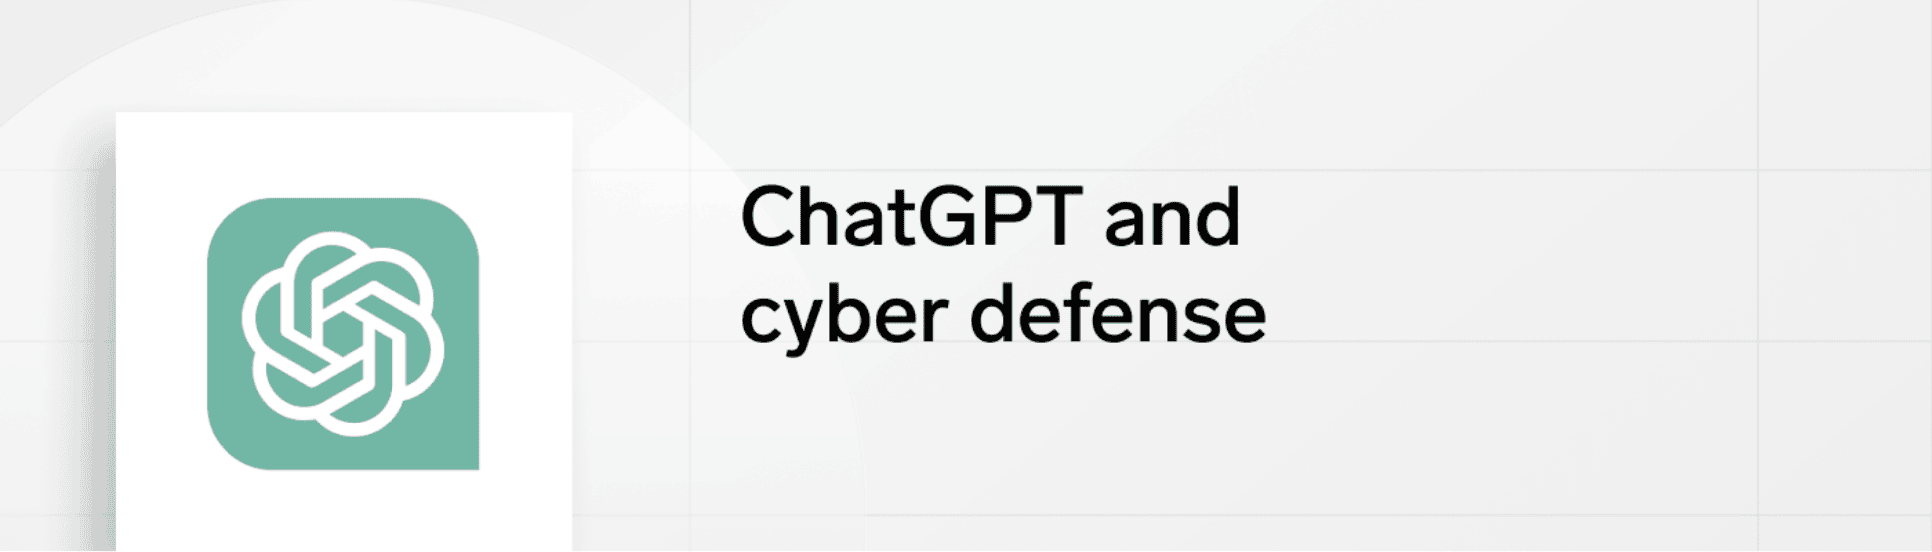 ChatGPT and cyber defense